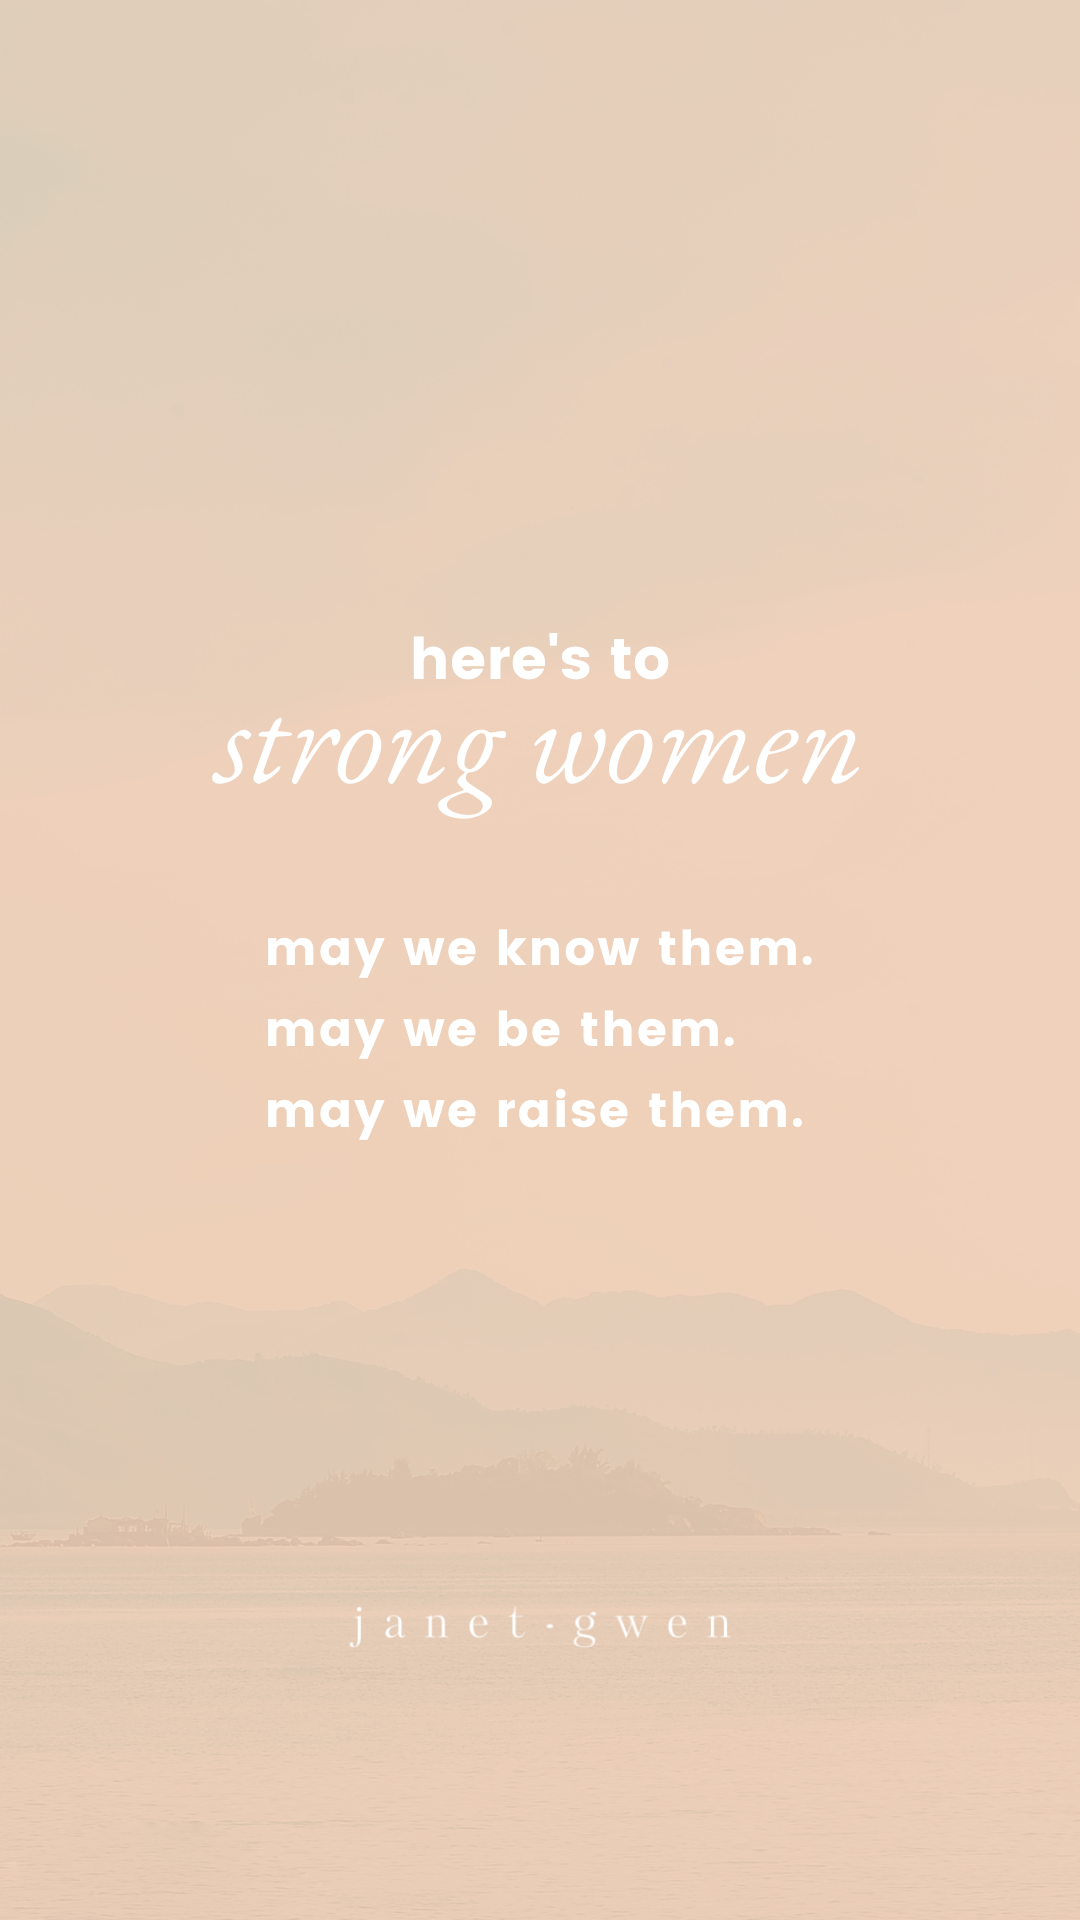 May Women Empowerment Quotes | Week 1